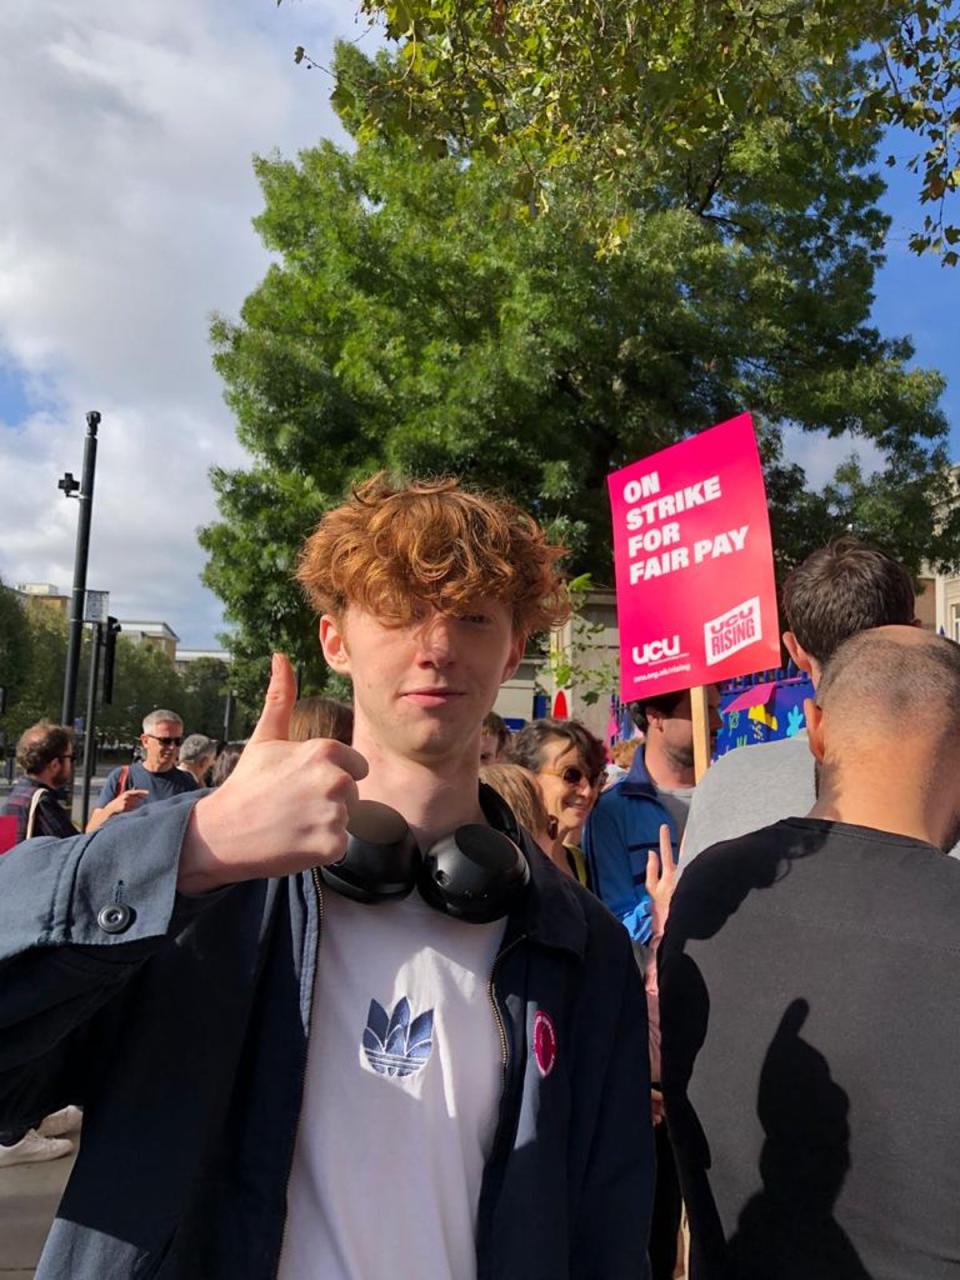 Student Rory Shears said he didn’t blame his lecturers despite cancelled classes (The Independent)